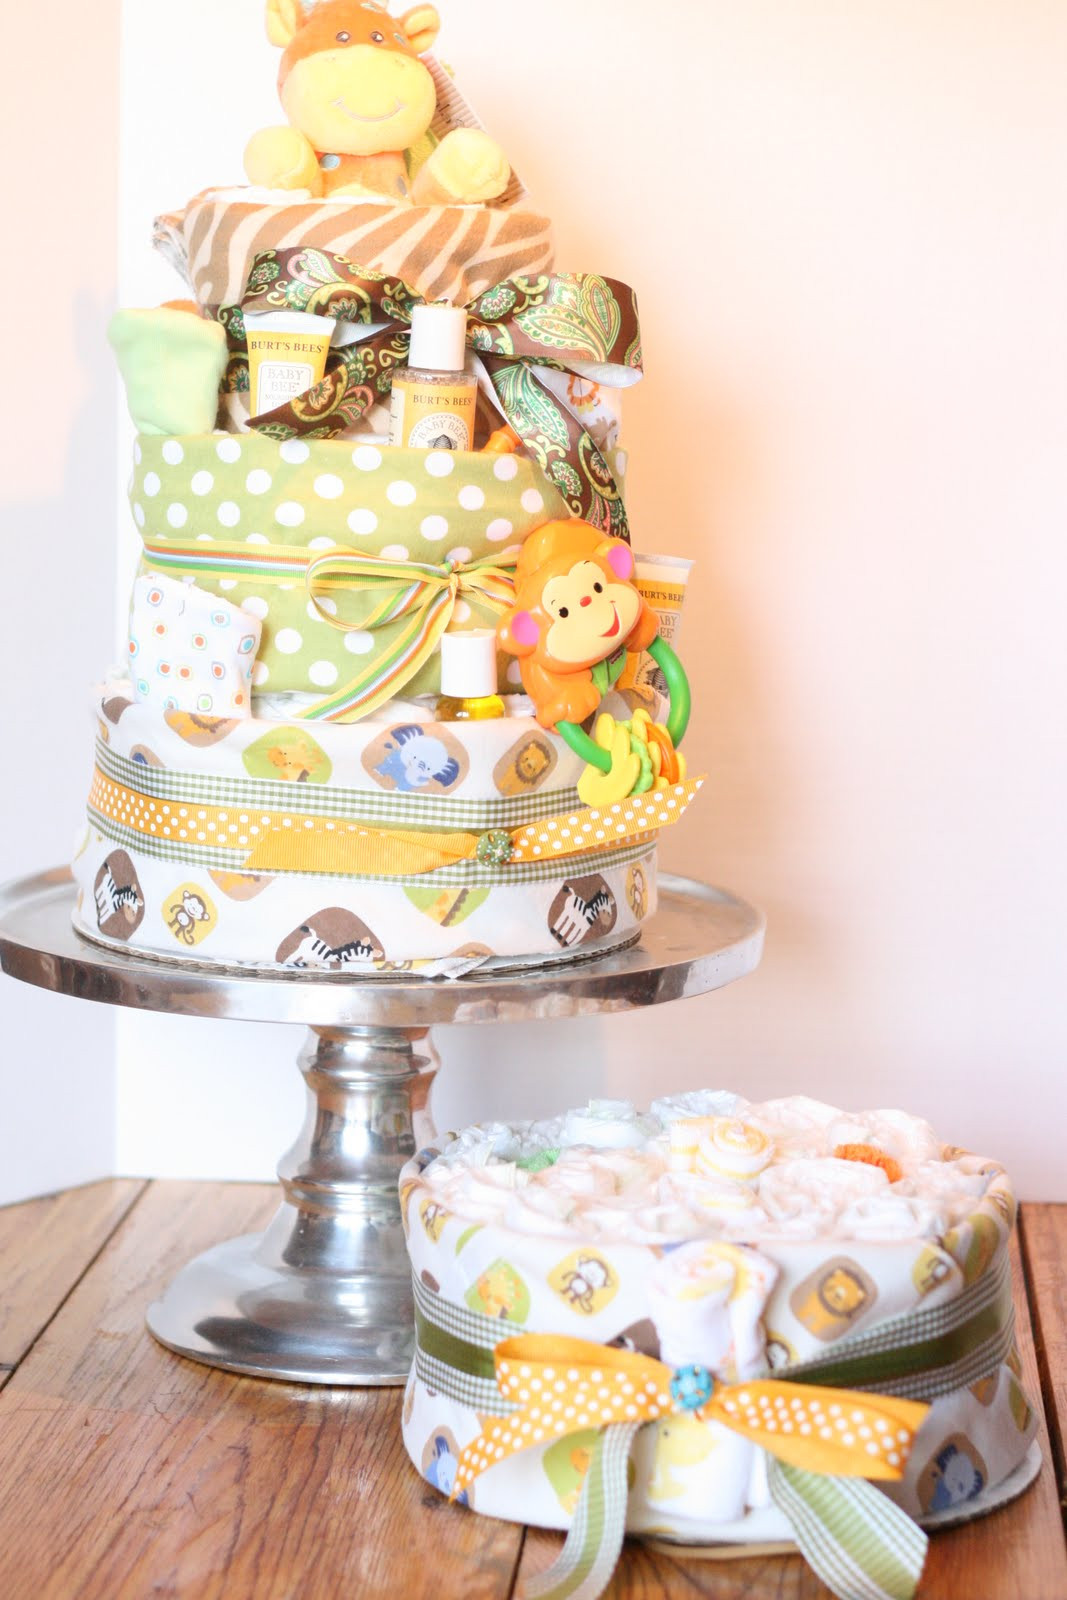 Diy Baby Shower Diaper Cake
 25 DIY Baby Shower Gifts for the Little Boy on the Wa